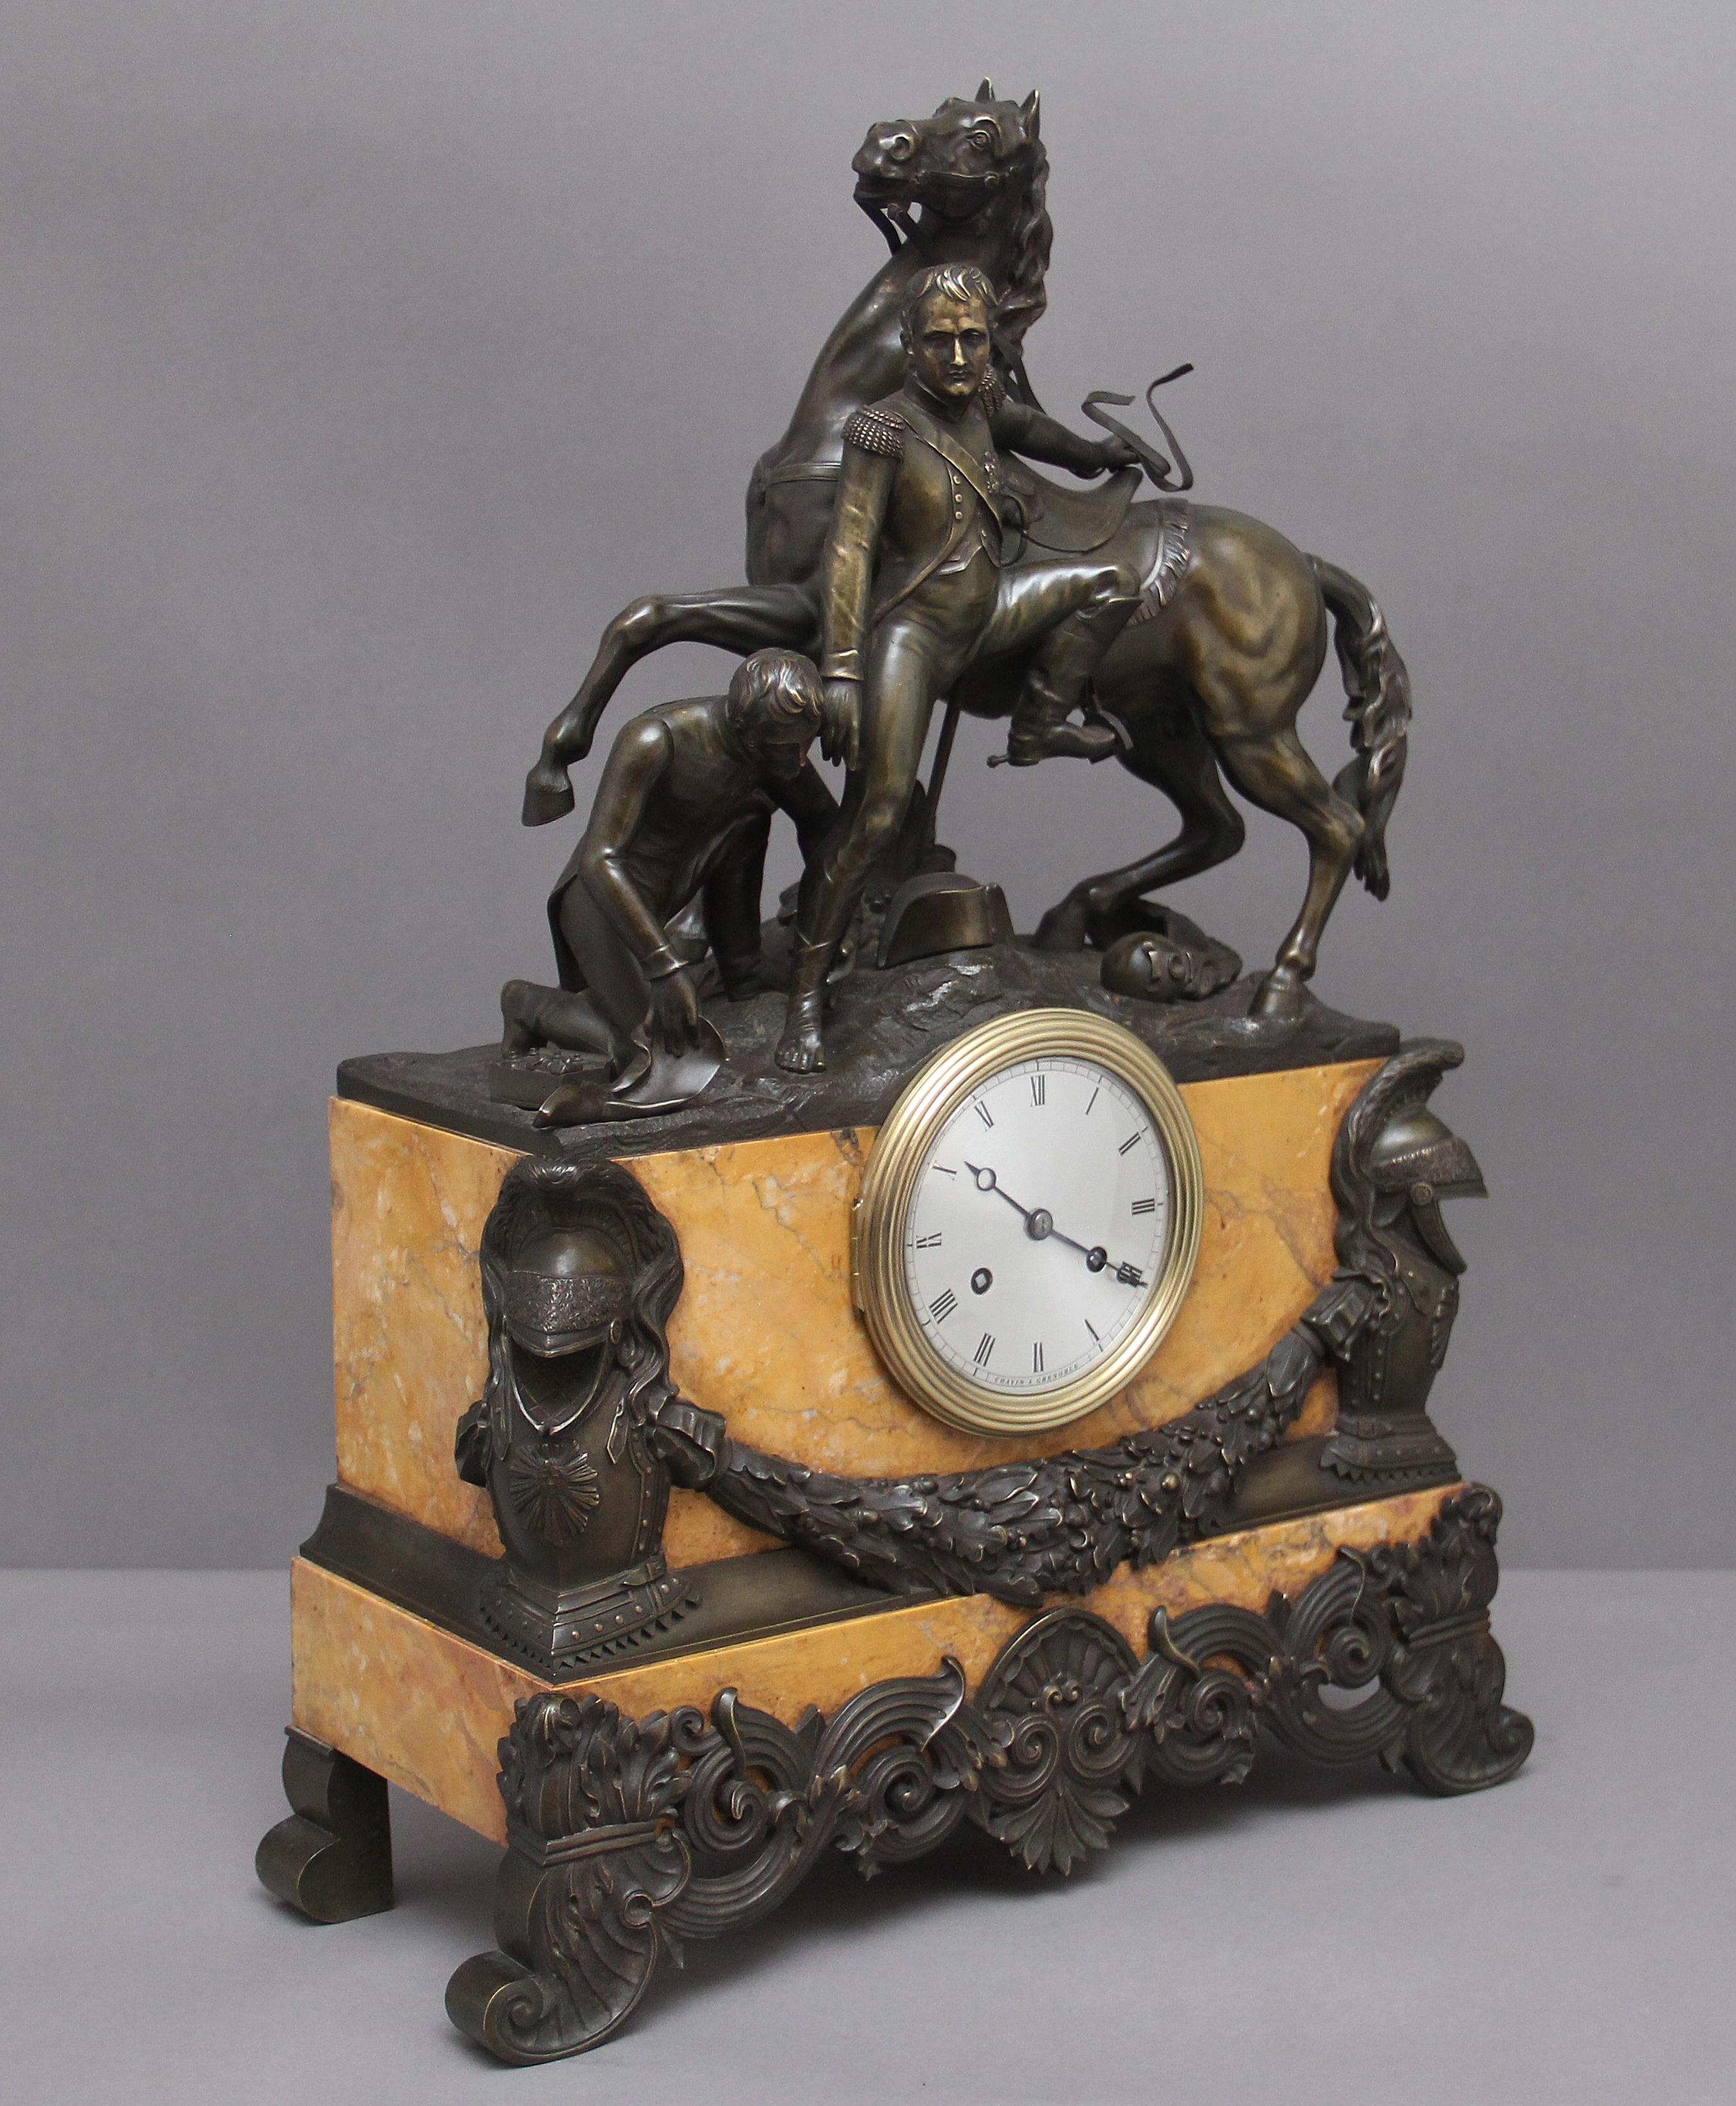 A fabulous quality early 19th century French marble and bronze mantle clock, the bronze with Napoleon being helped to mount his horse by his groom, superb quality bronze mounts and feet. The clock movement has been cleaned and overhauled and is